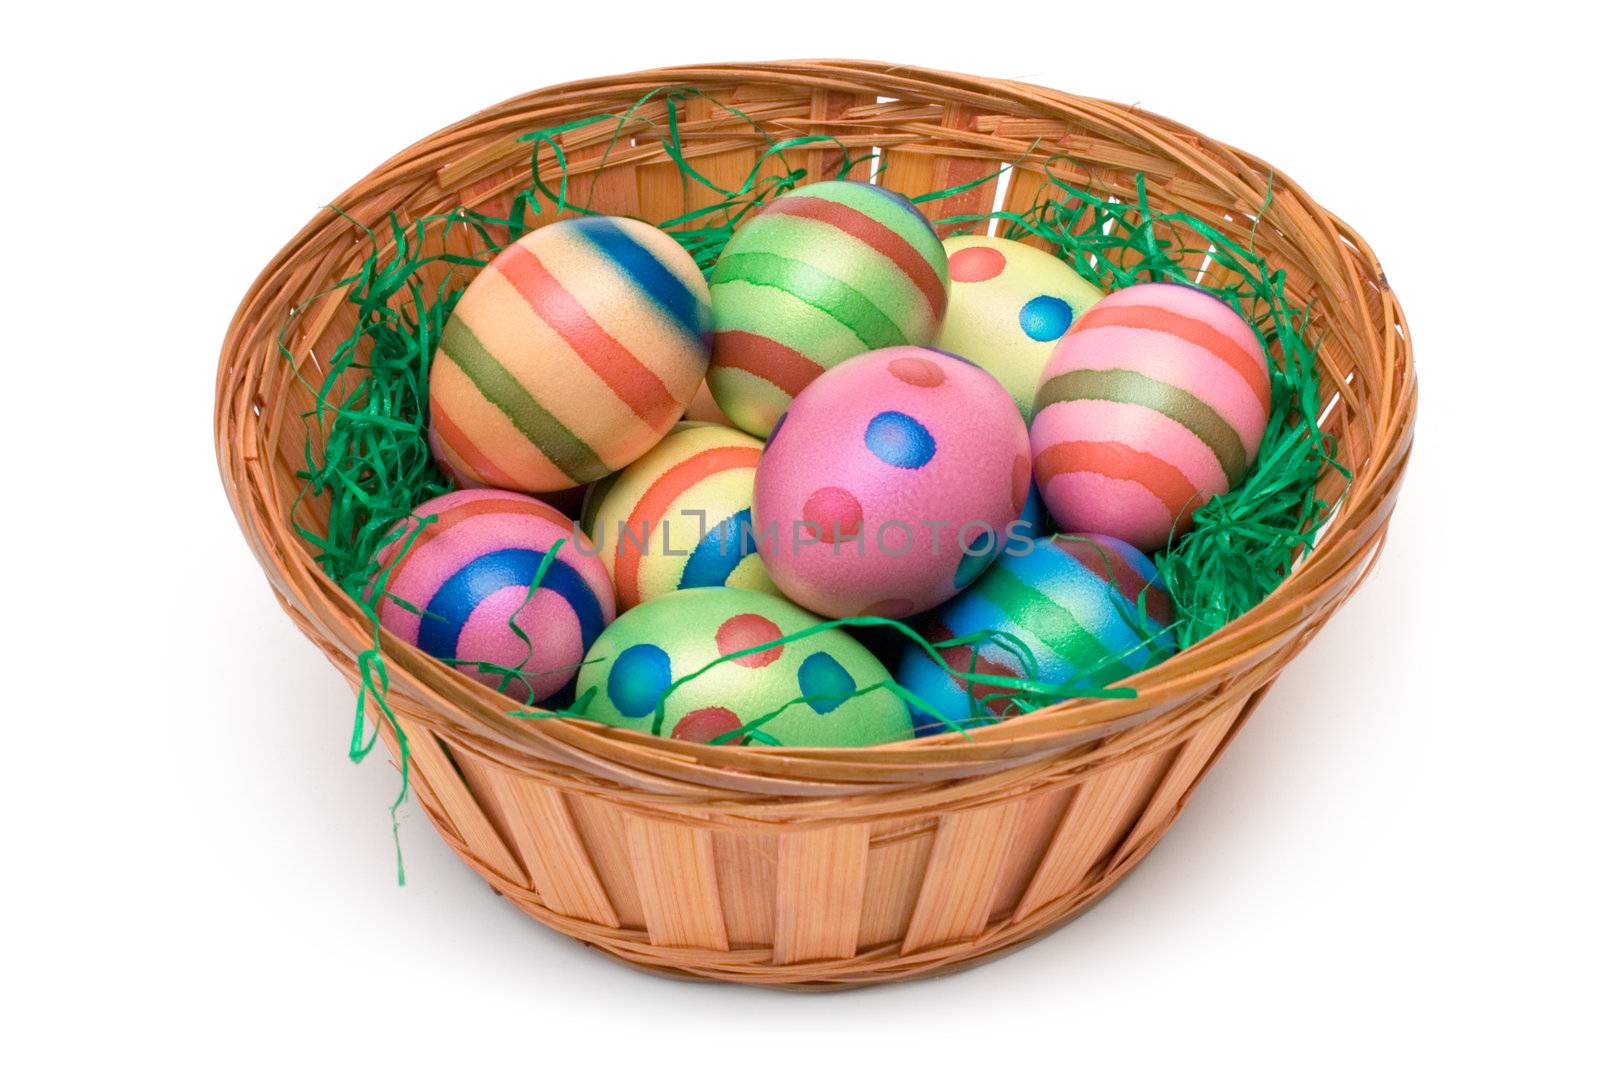 Colorful eggs on green grass in a wooden basket. Isolated on a
white background.